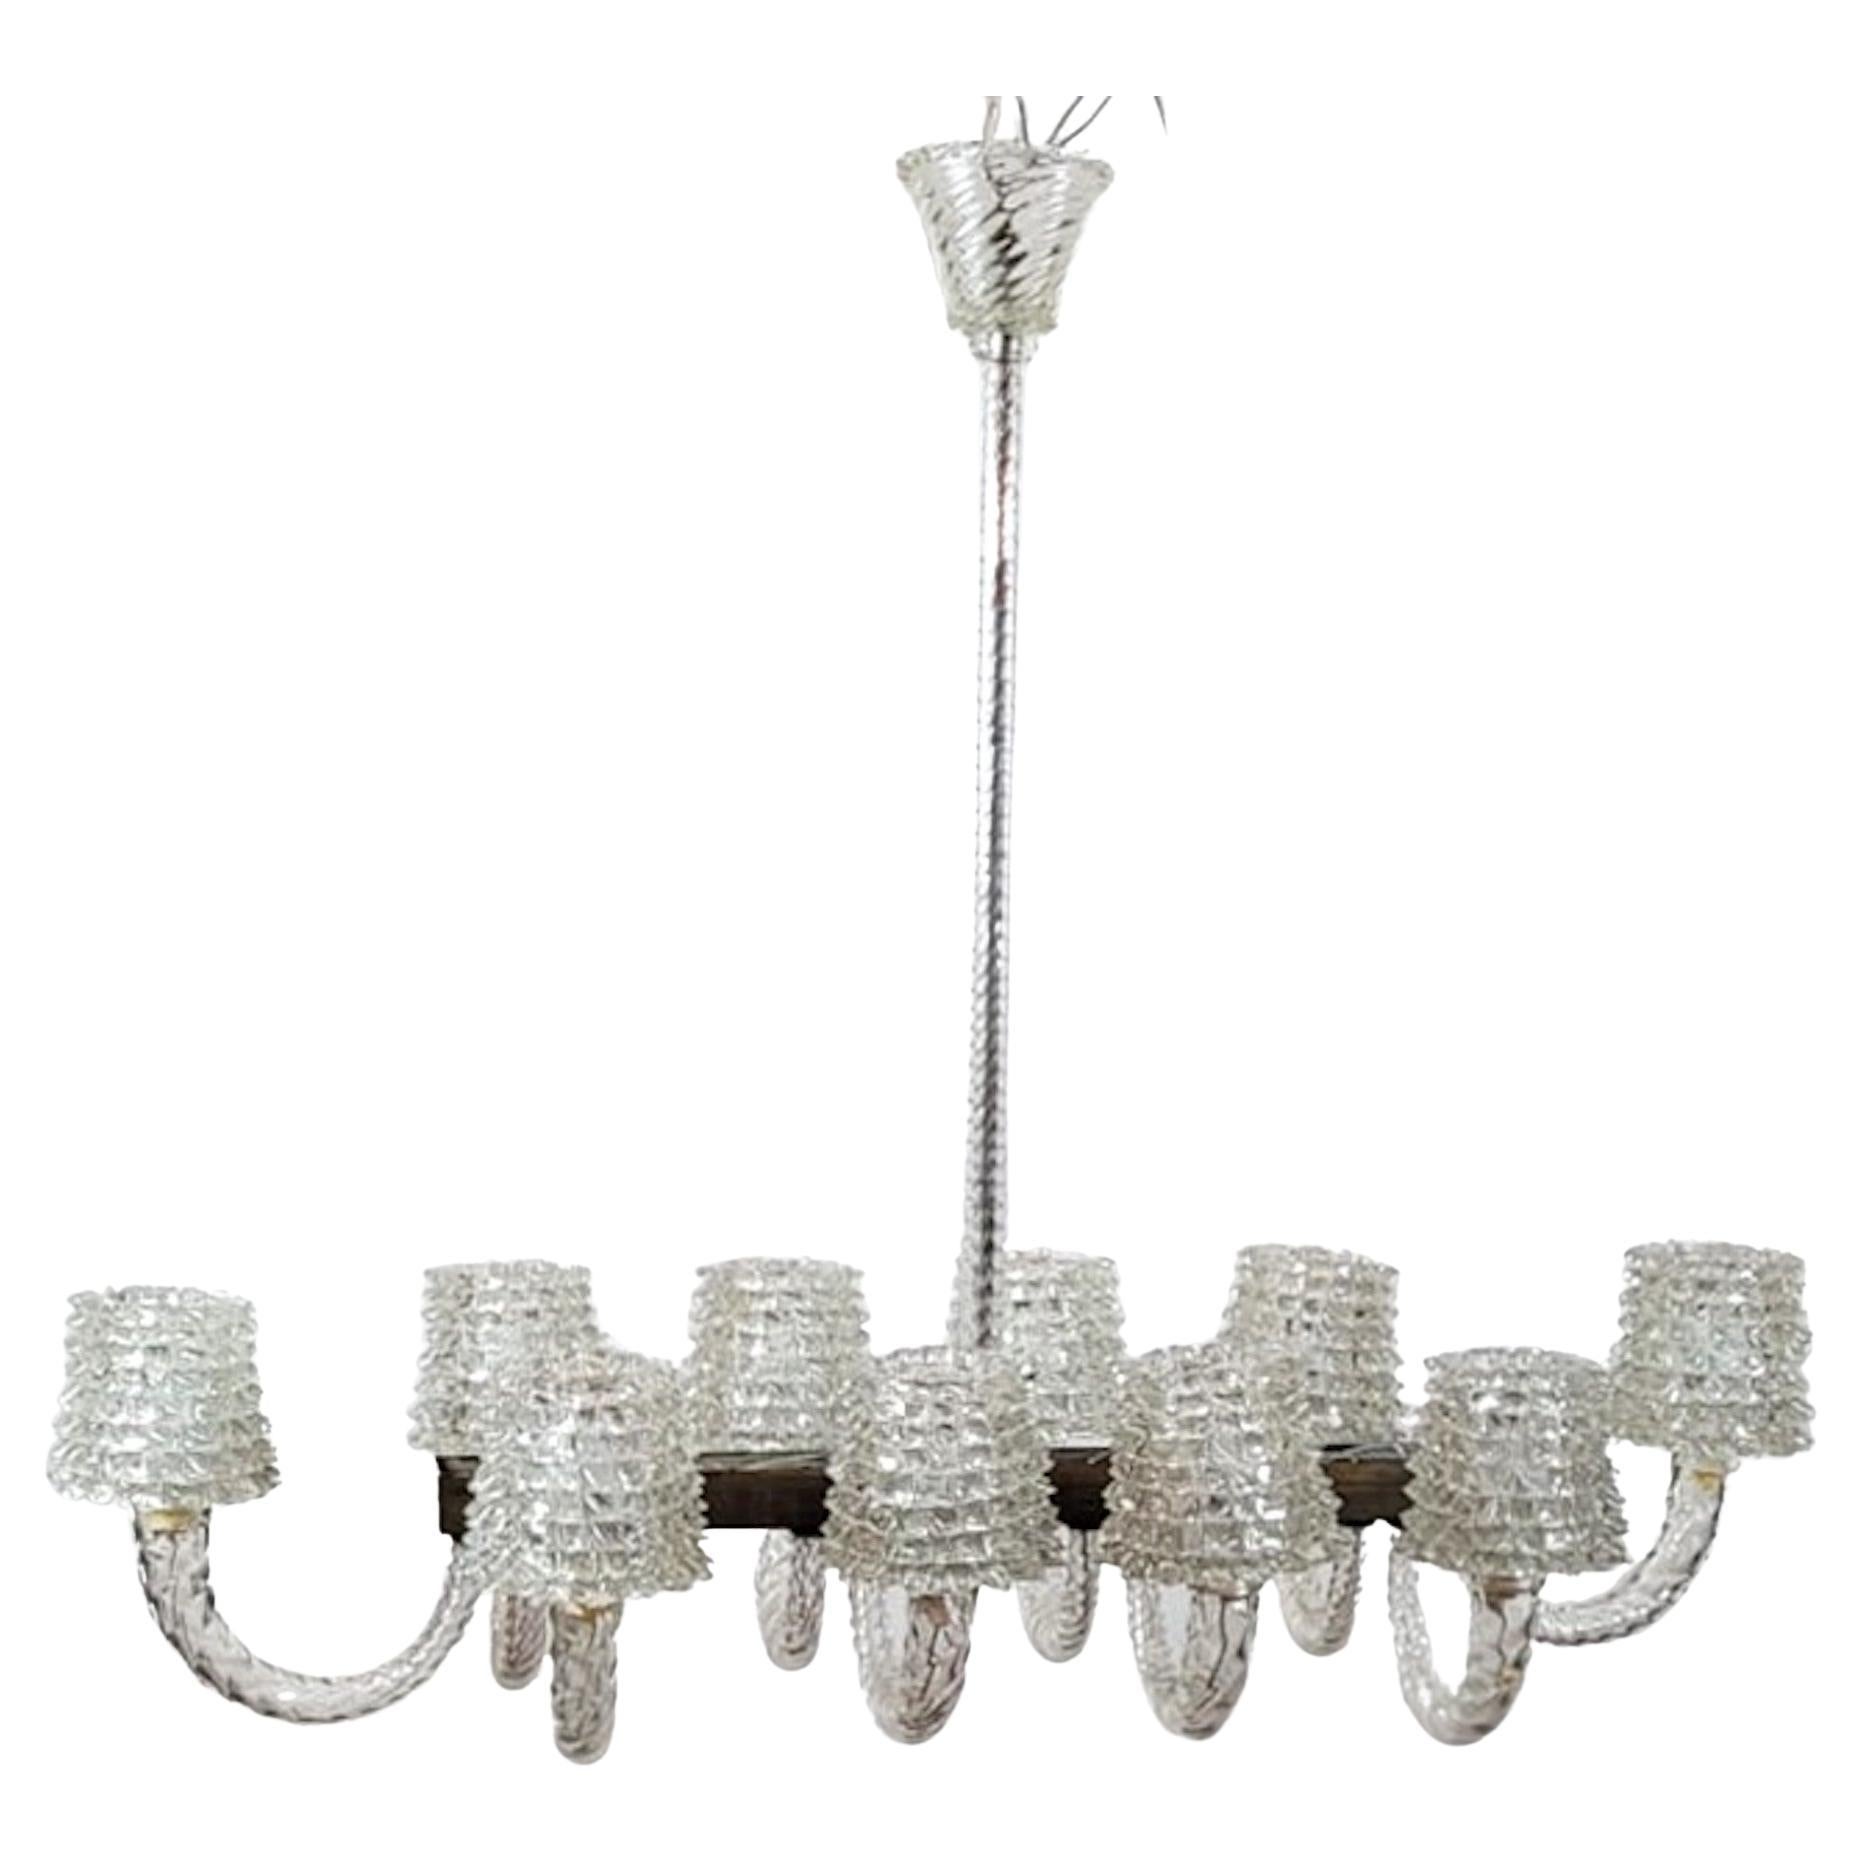 Large Barovier And Toso Chandelier - Murano - 10 Sconces For Sale